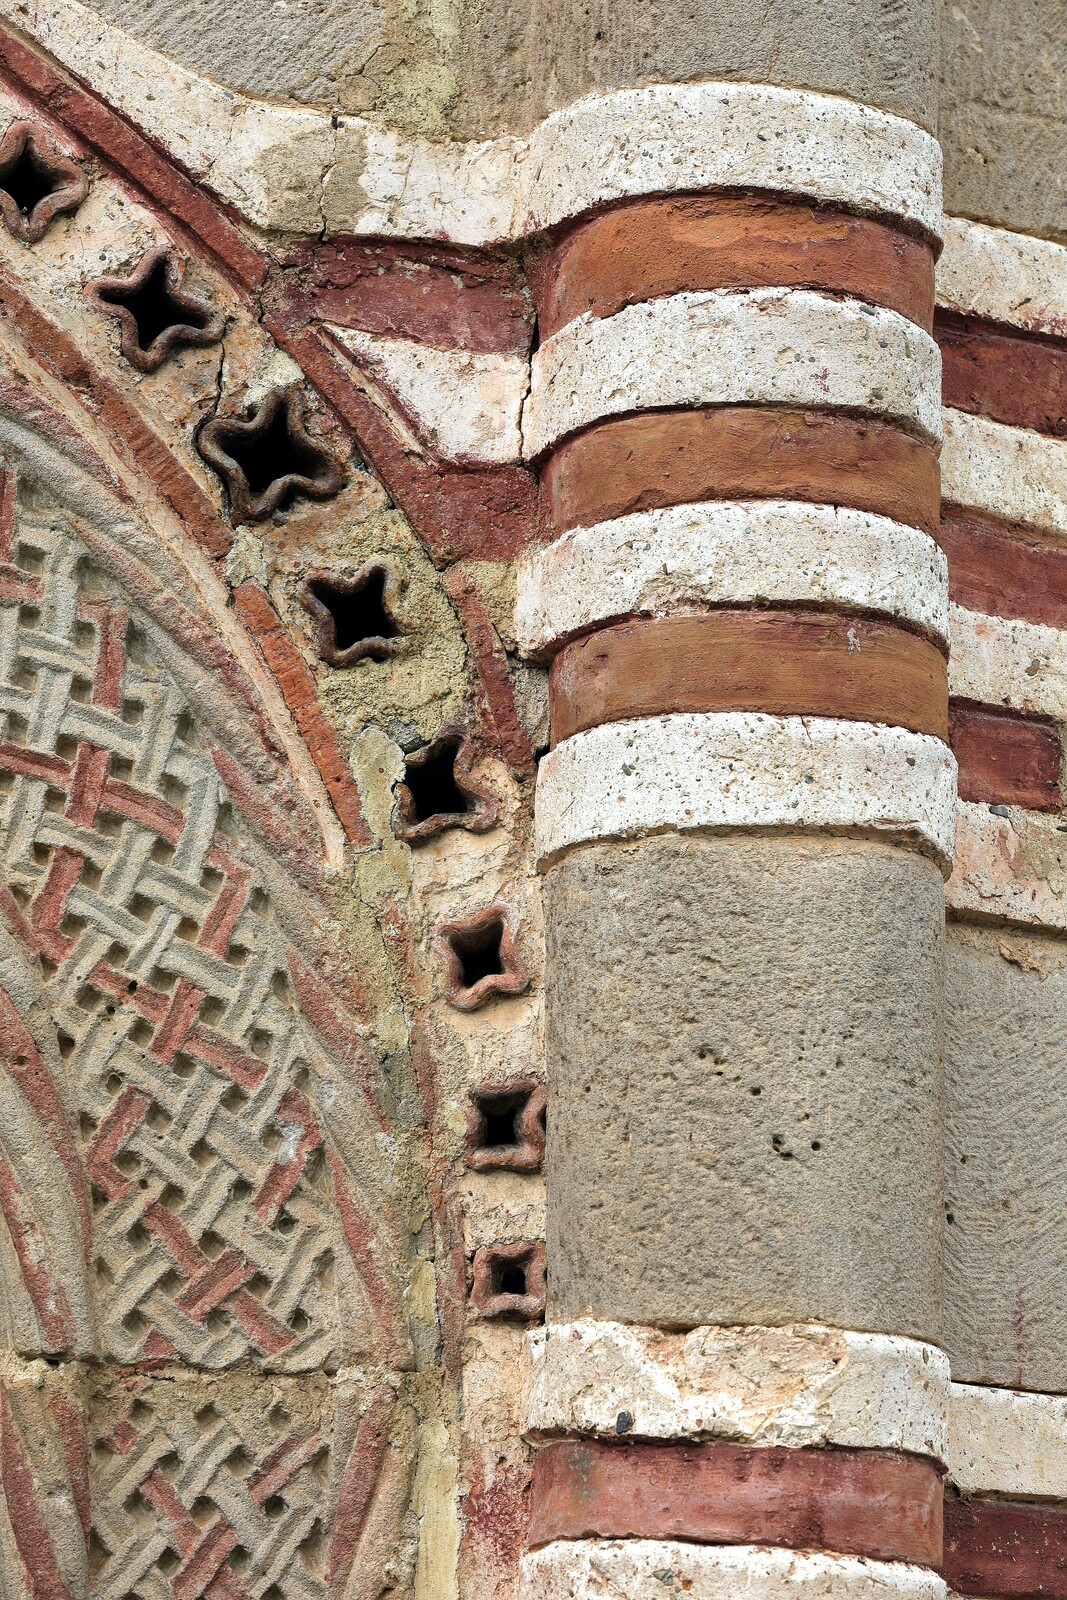 Bifora on the South chantry with a Representation of a Griffin, detail